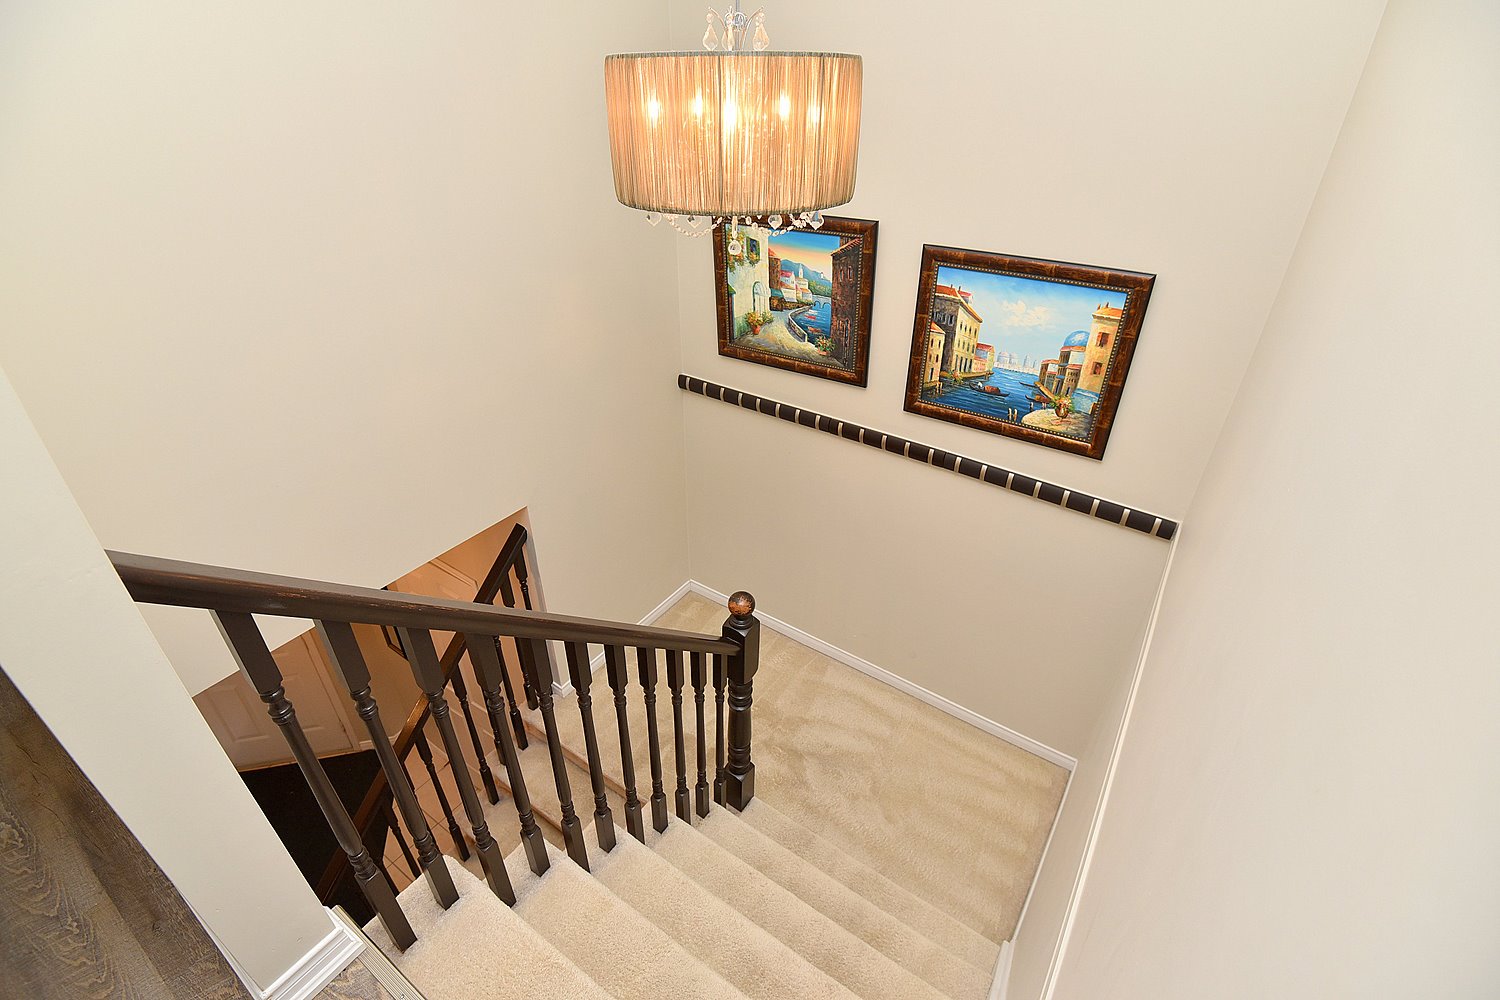 Staircase Overview